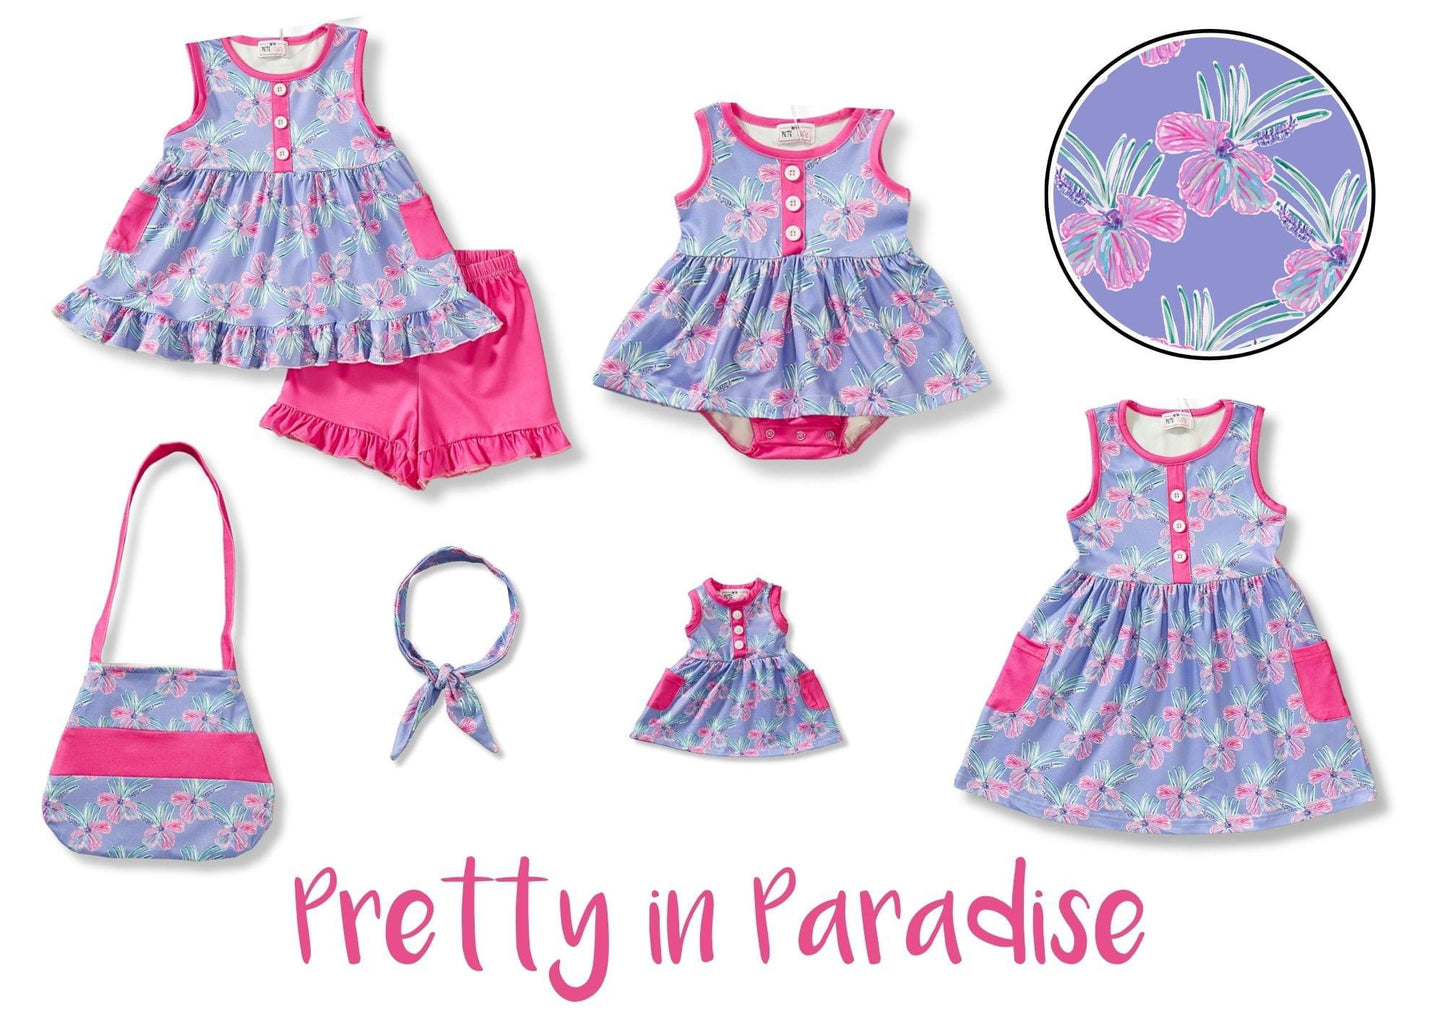 Pretty in Paradise Dress by Pete + Lucy